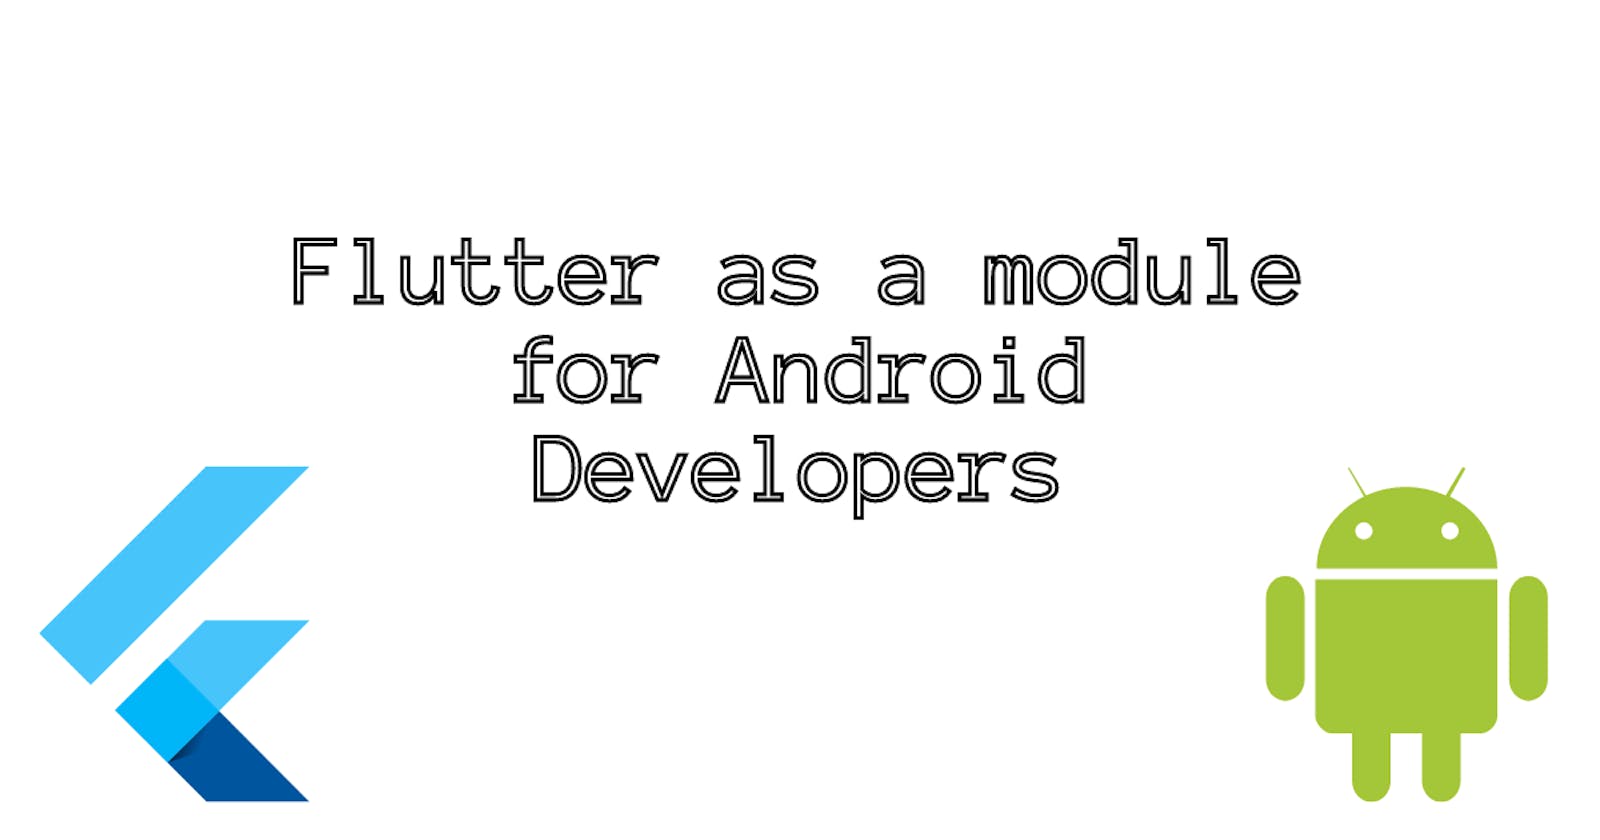 Flutter as a module for Android Developers